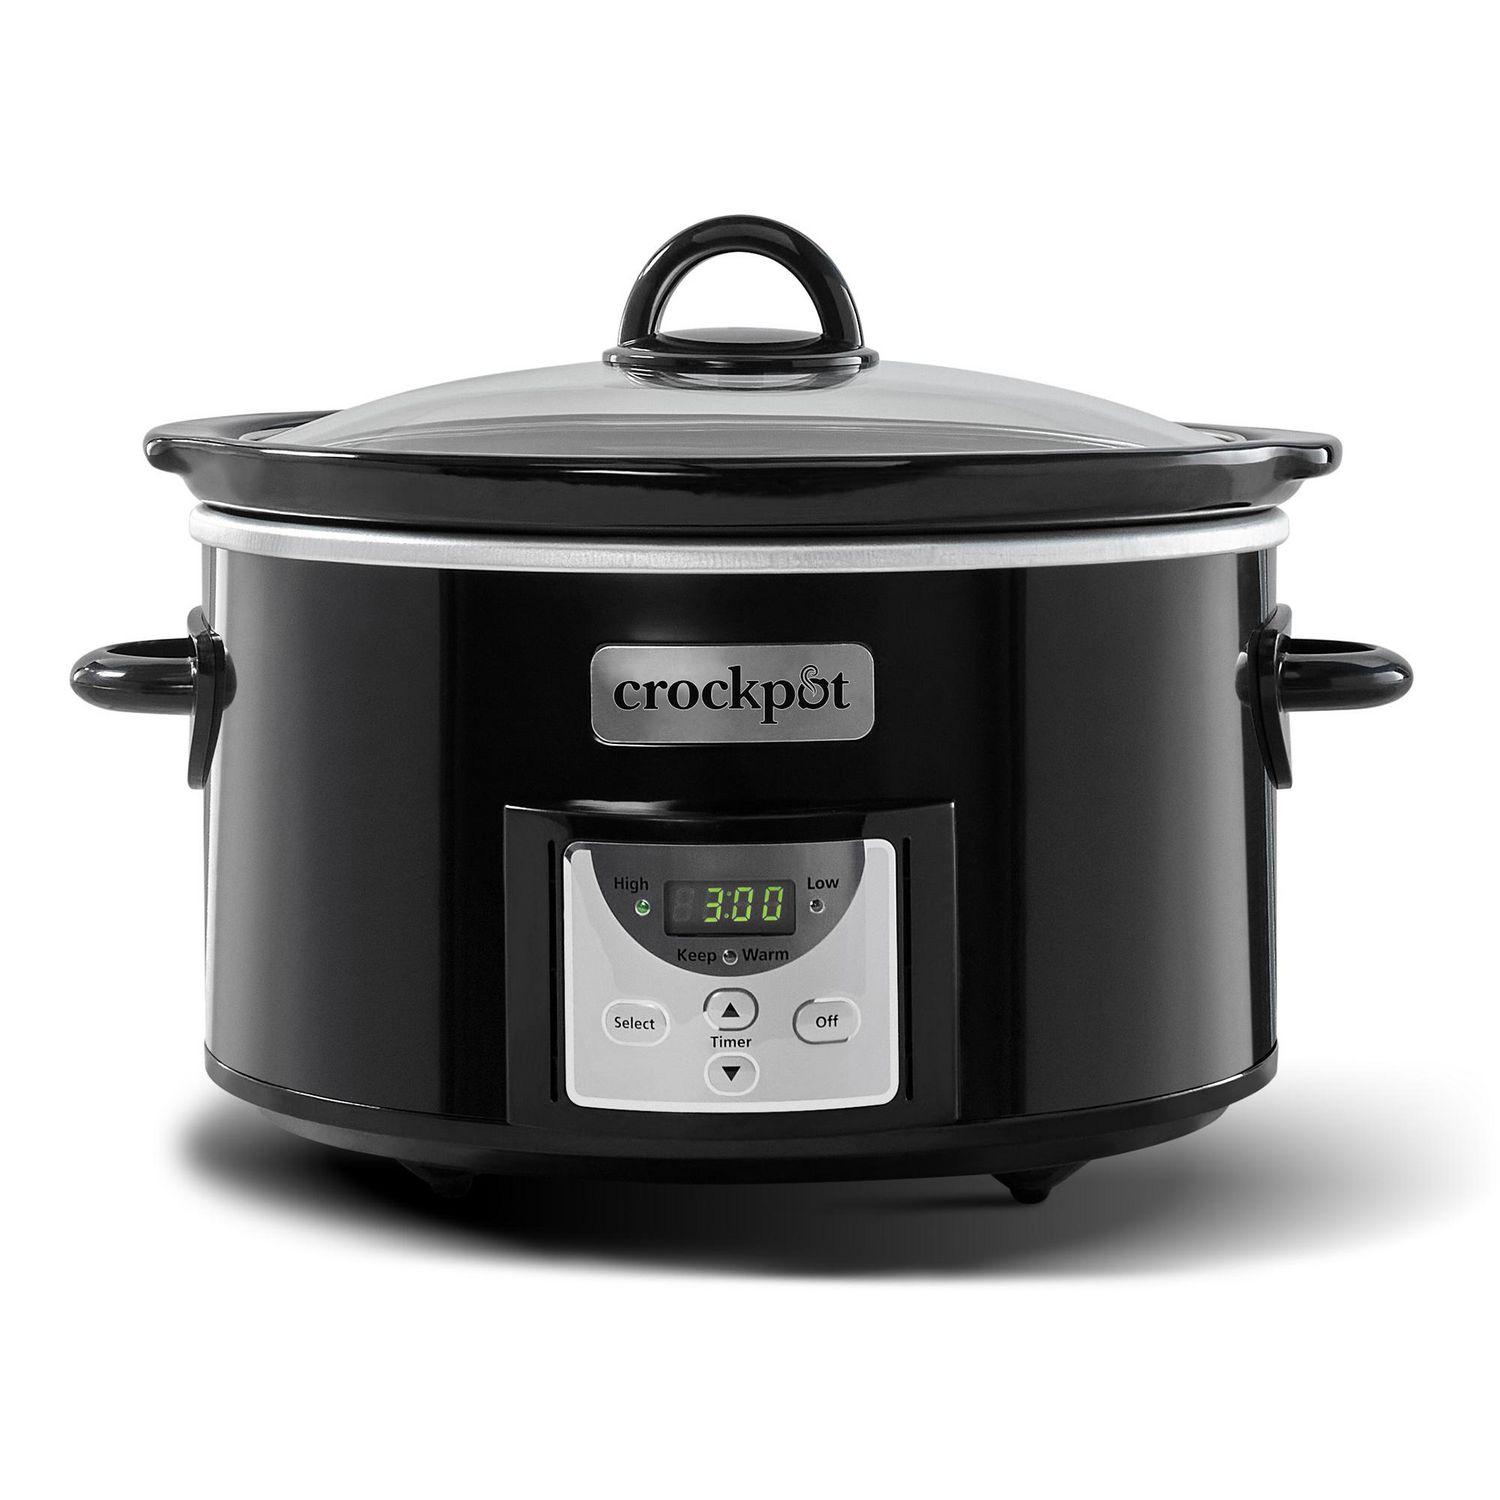 Kenmore Programmable 7 qt (6.6L) Slow Cooker and Dipper, Black Silver